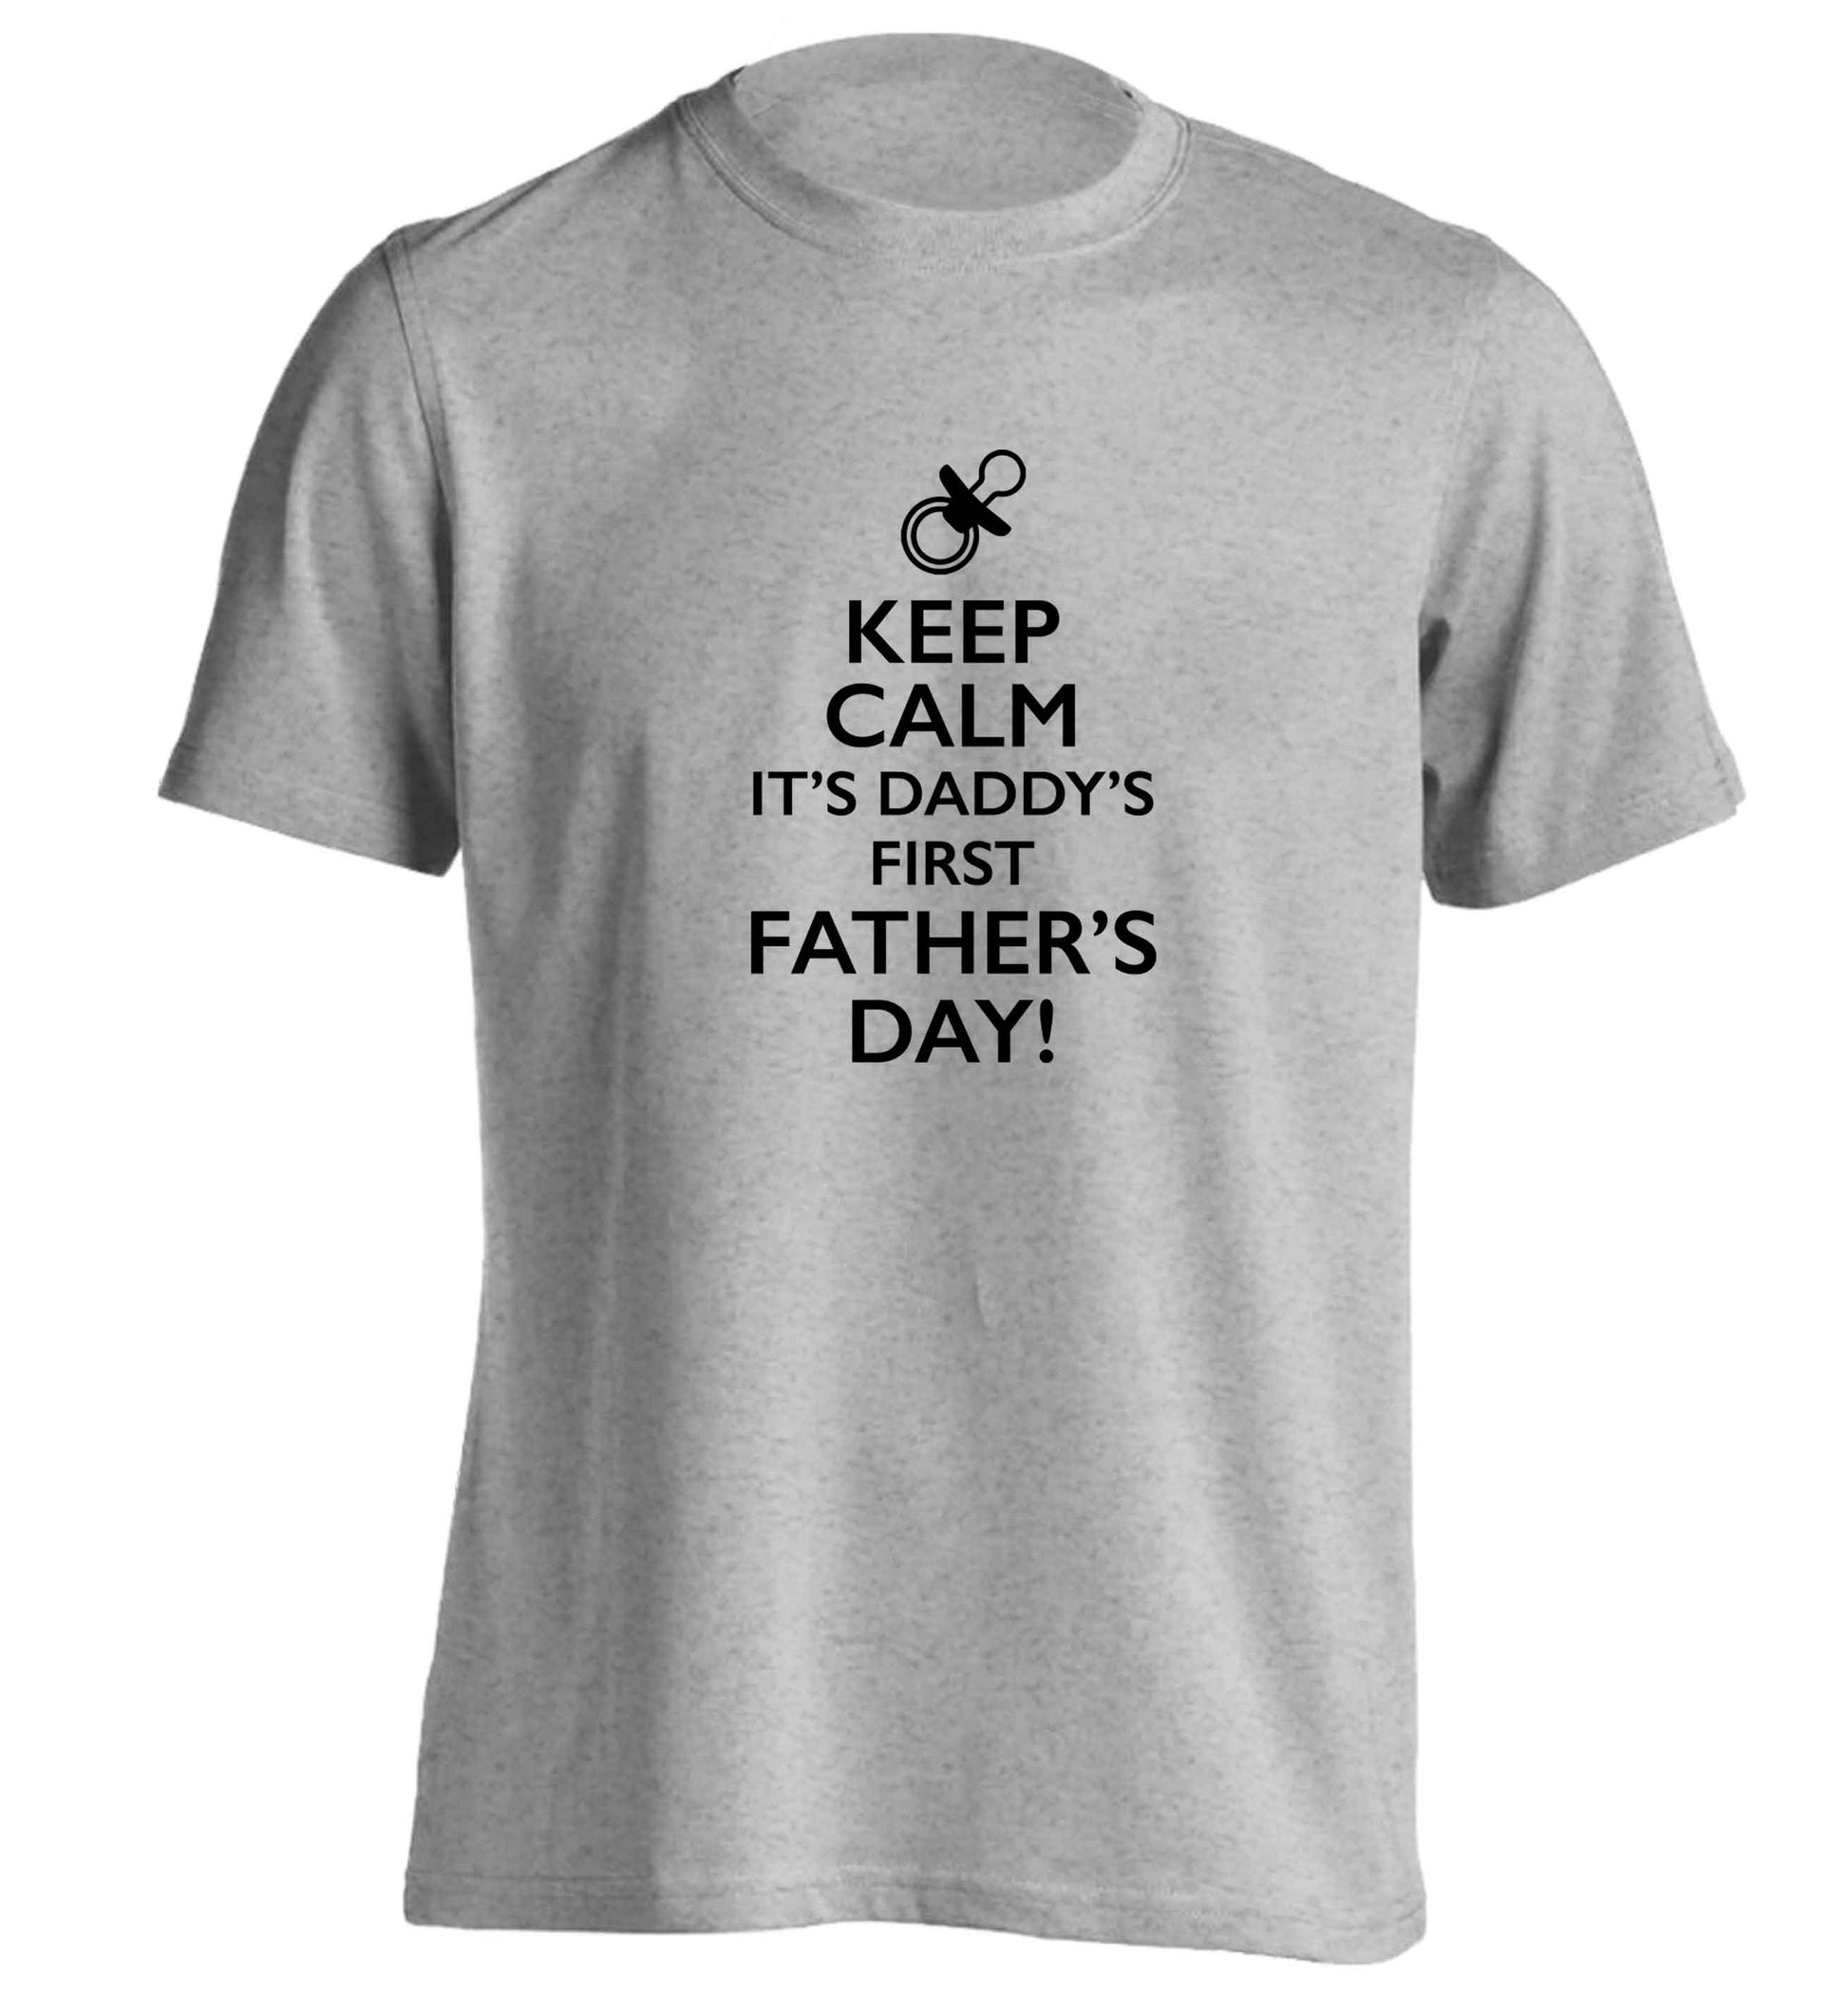 Keep calm it's daddys first father's day adults unisex grey Tshirt 2XL